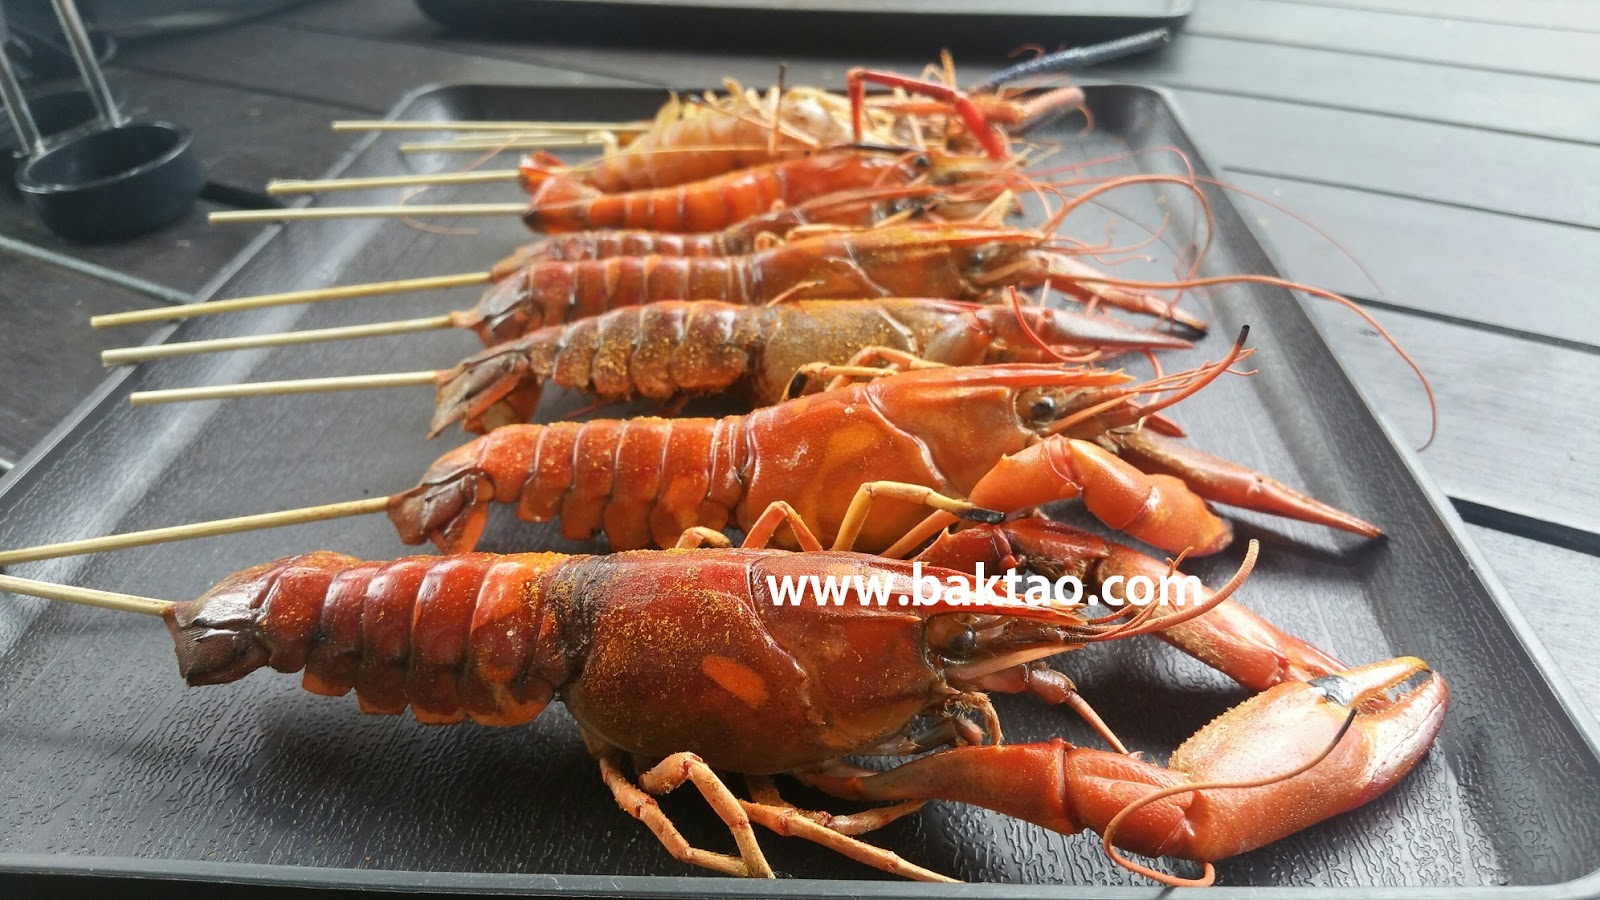 8 tips for catching or prawning for yabbies in Singapore